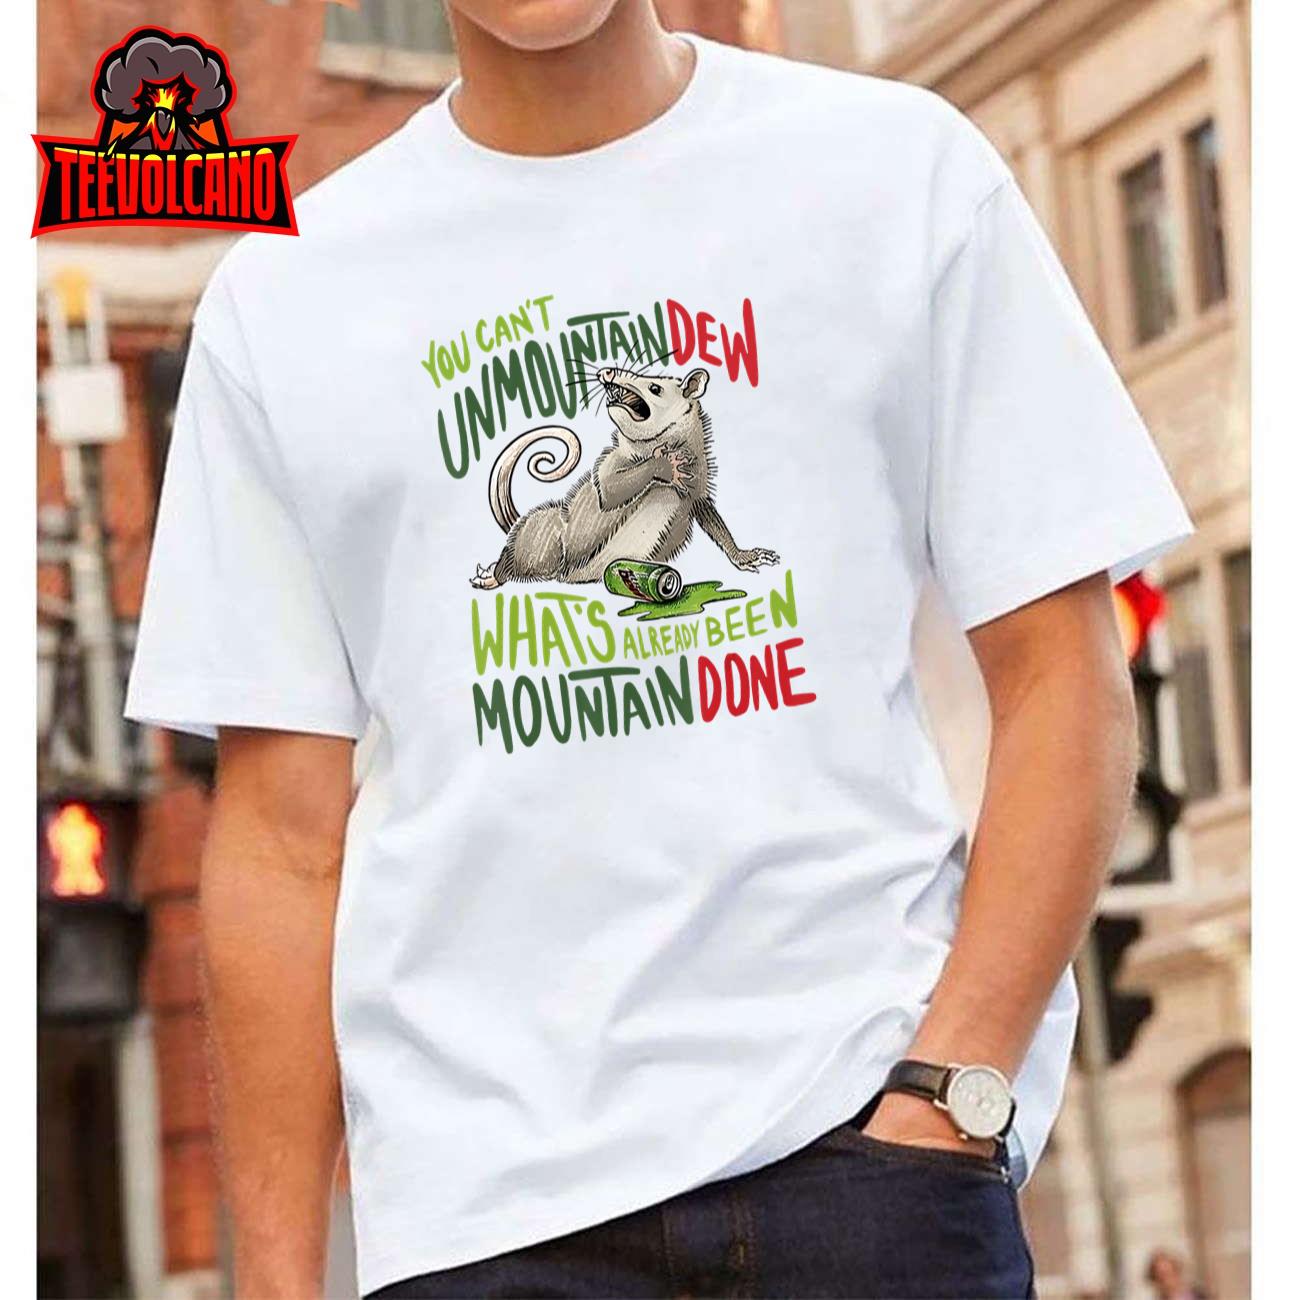 You Can’t Unmountain Dew What’s Already Been Mountain Done T-Shirt